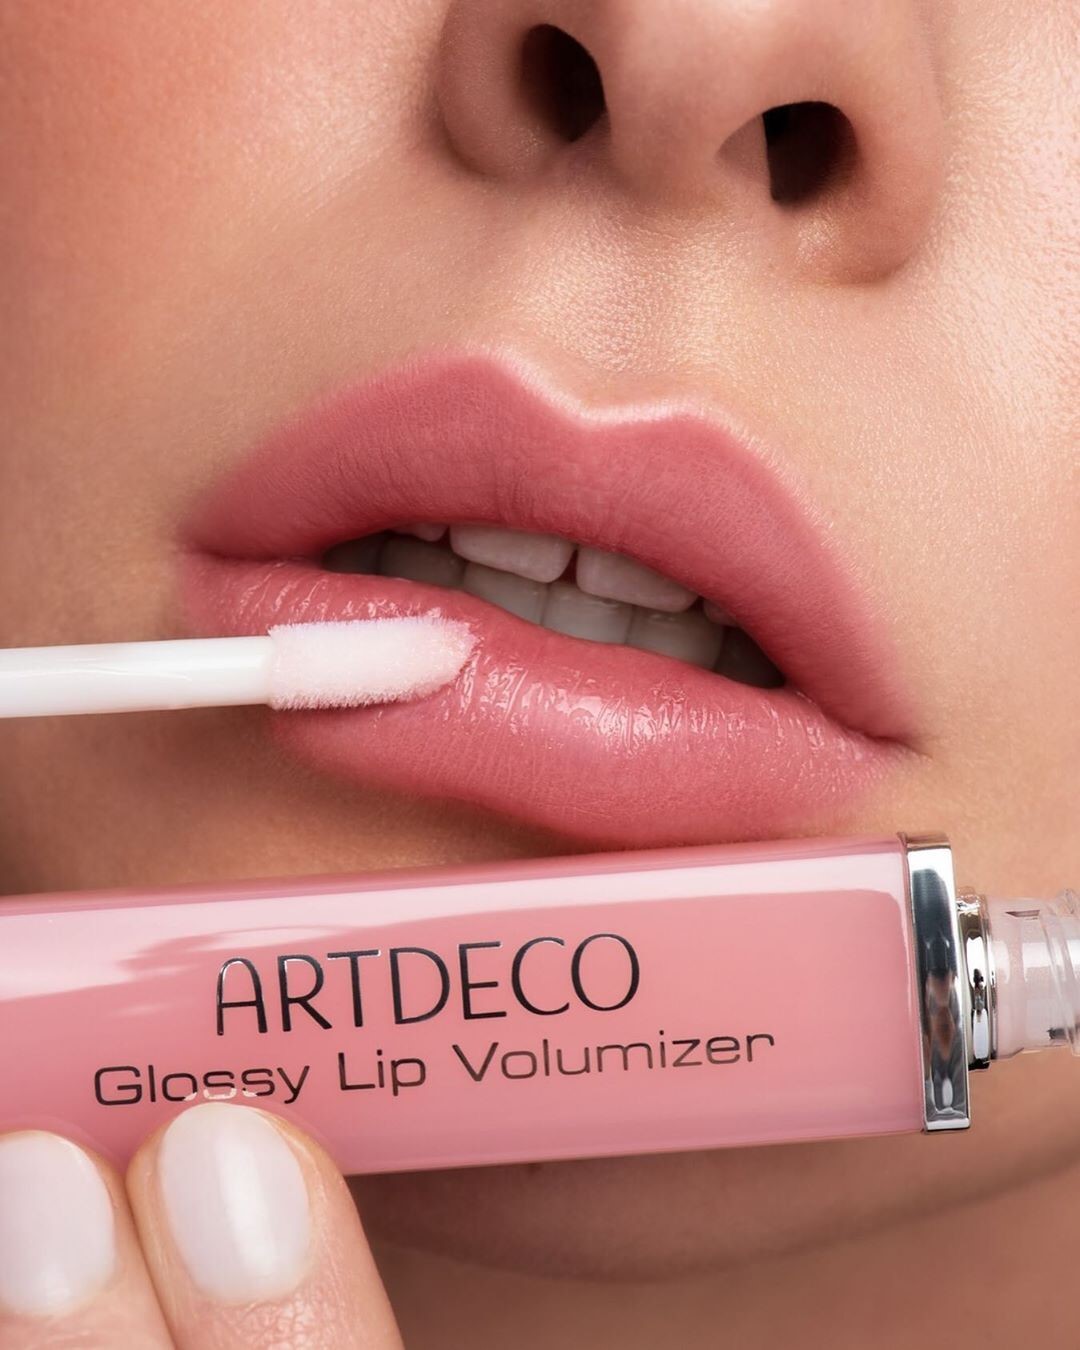 ARTDECO - Our Glossy Lip Volumizer Lipgloss gives your lips seductive volume within seconds. 👄 Have you tried it?⠀⠀⠀⠀⠀⠀⠀⠀⠀
⠀⠀⠀⠀⠀⠀⠀⠀⠀
Model: @emi.ly.98⠀⠀⠀⠀⠀⠀⠀⠀⠀
MuA: @sabrinabeauty.mua	⠀⠀⠀⠀⠀⠀⠀⠀⠀
Photog...